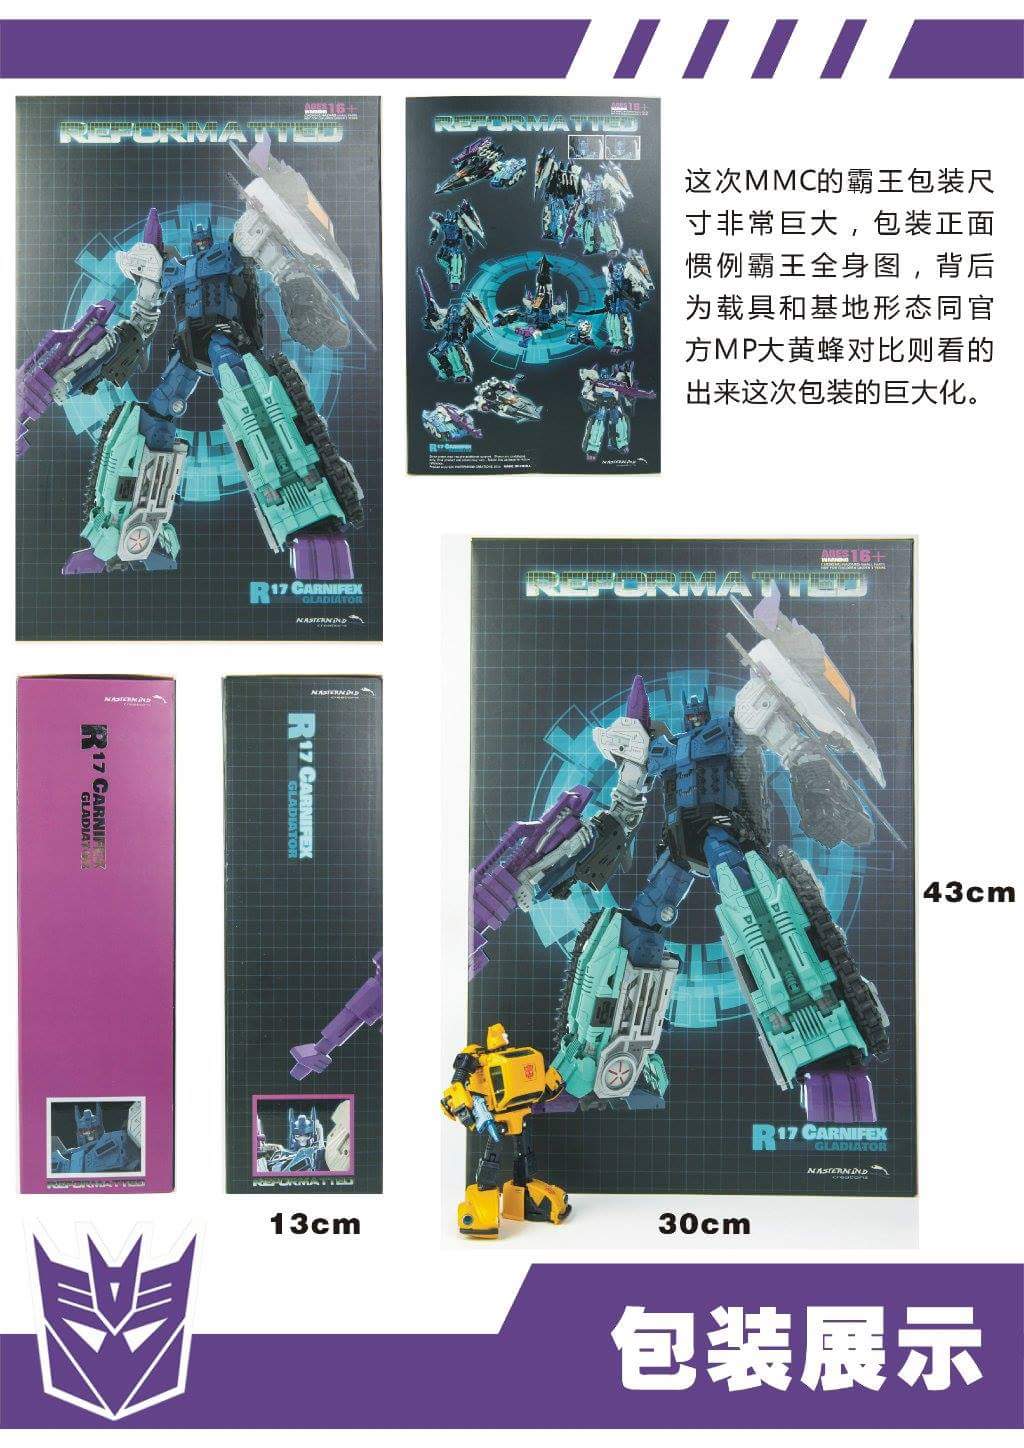 [Mastermind Creations] Produit Tiers - R-17 Carnifex - aka Overlord (TF Masterforce) - Page 3 154oGMQn